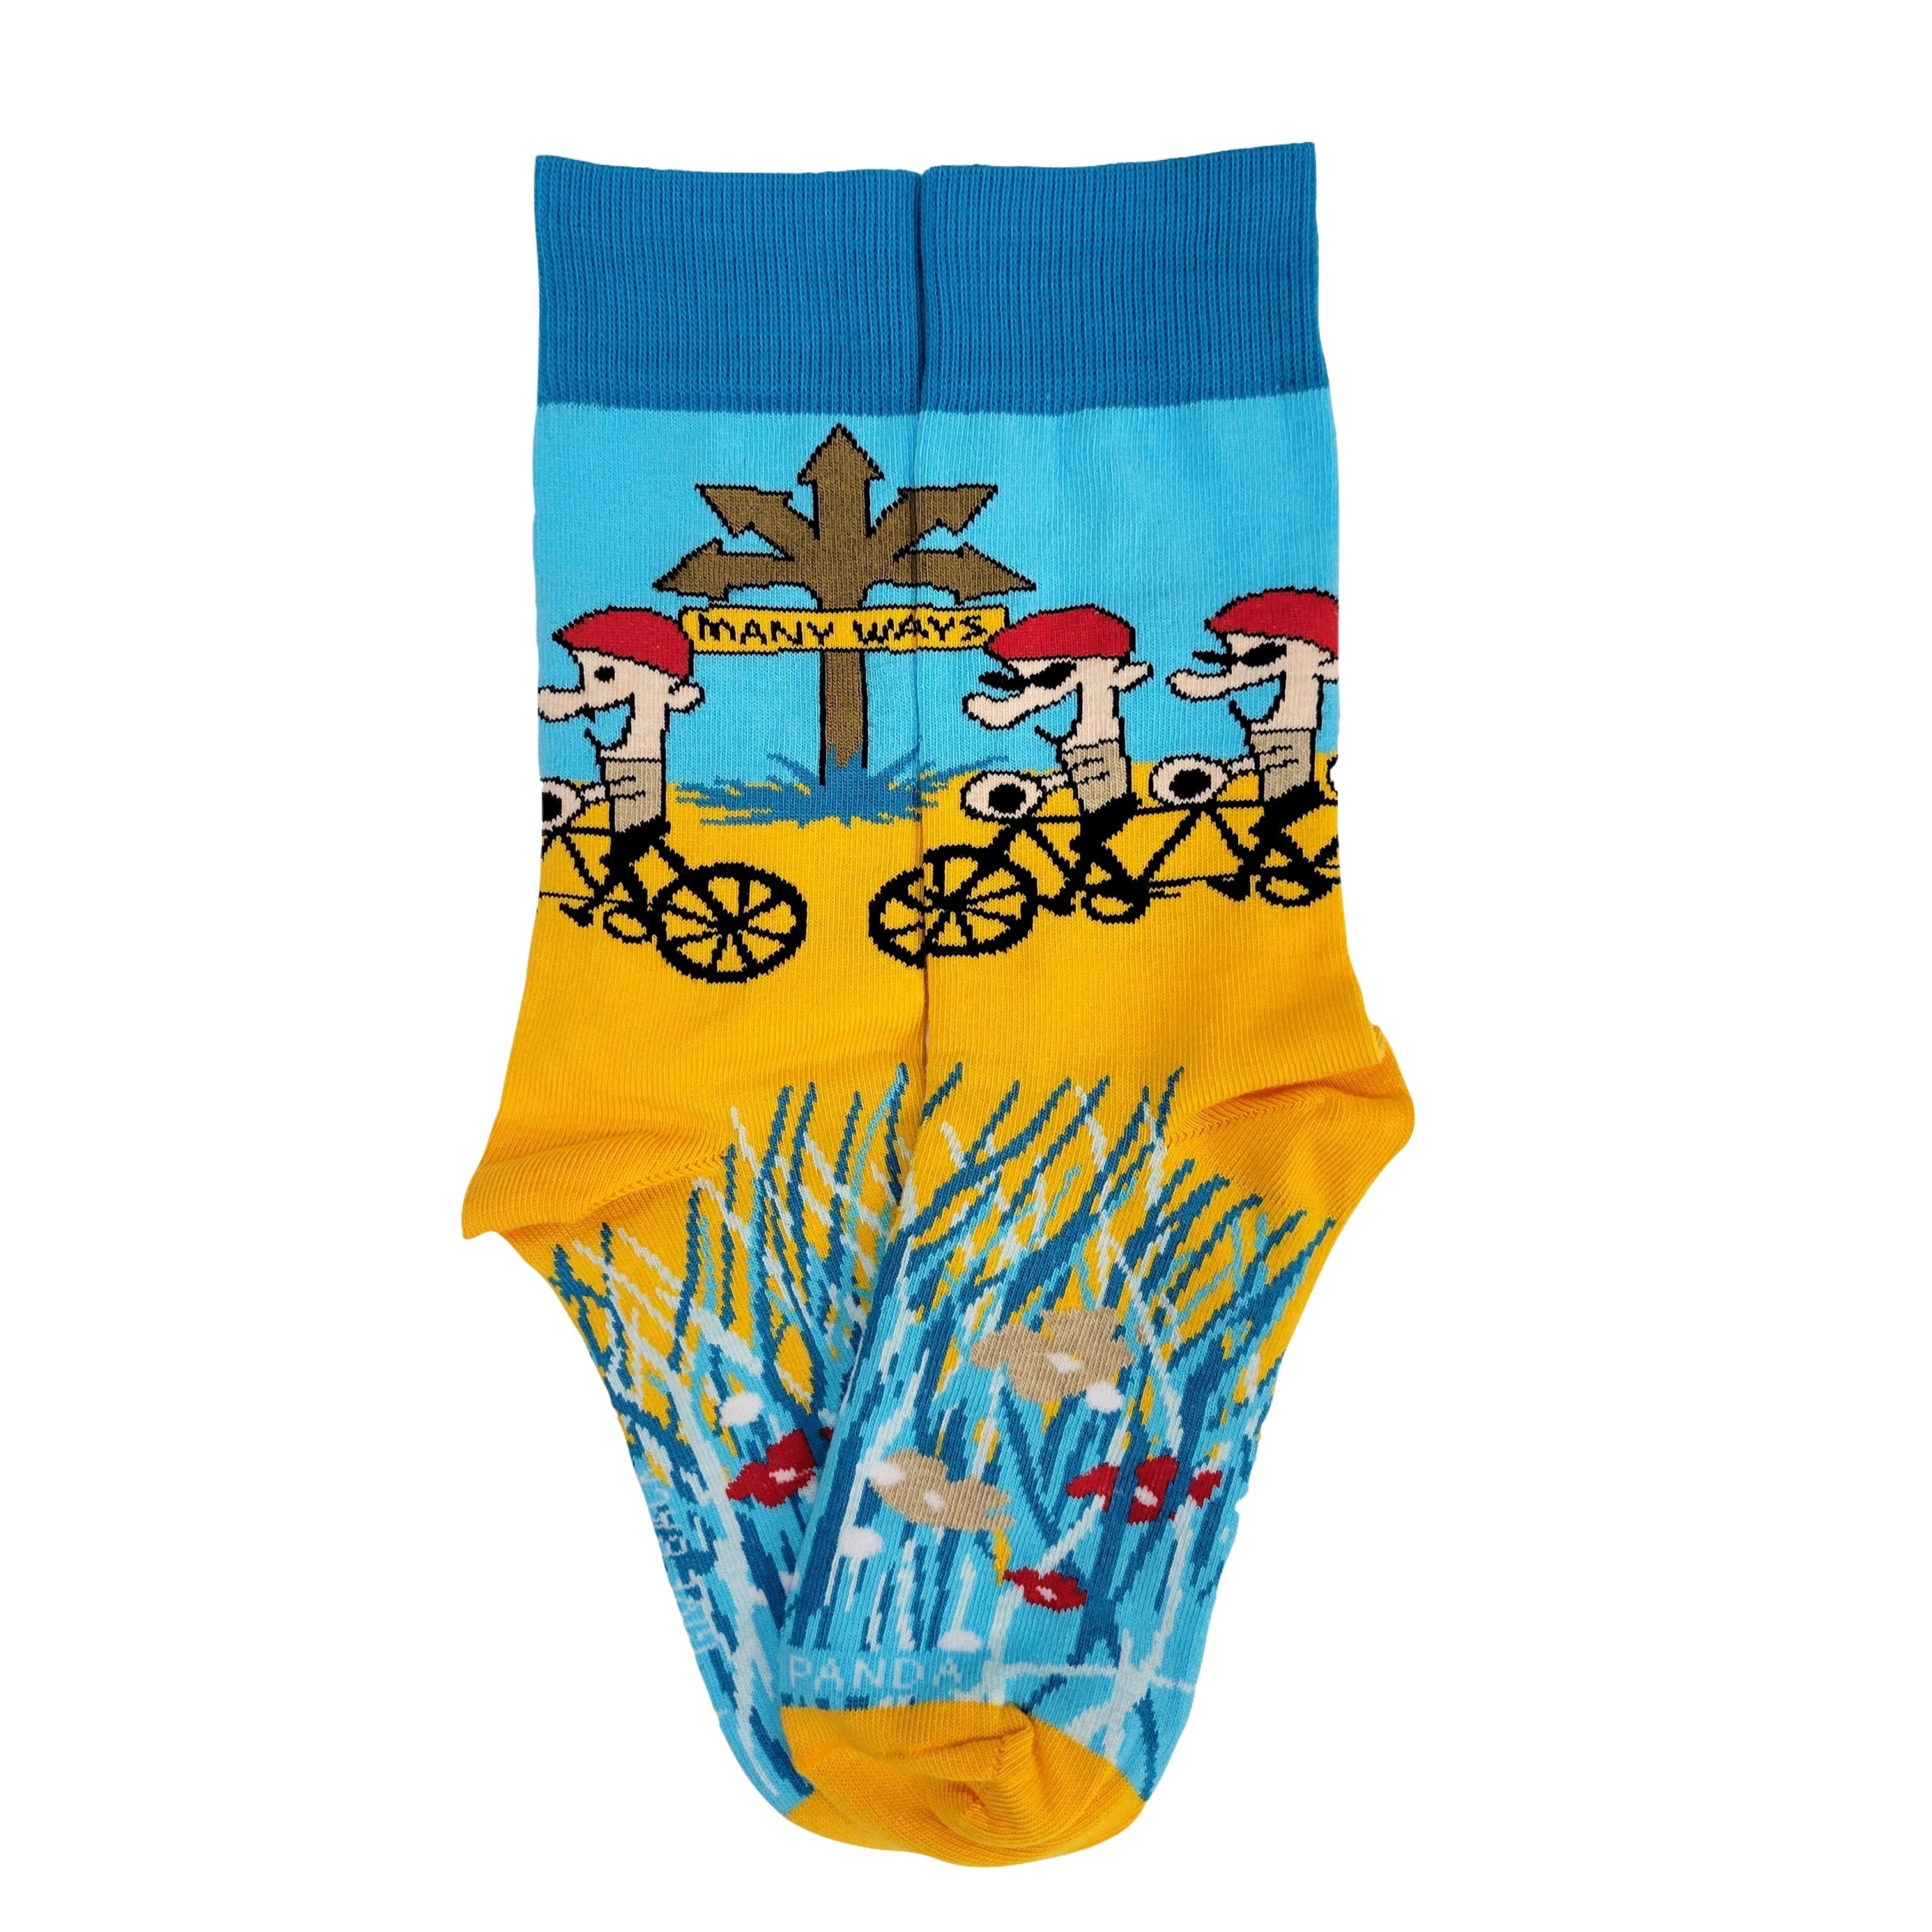 Many Ways Bicycle Socks from the Sock Panda (Adult Small)